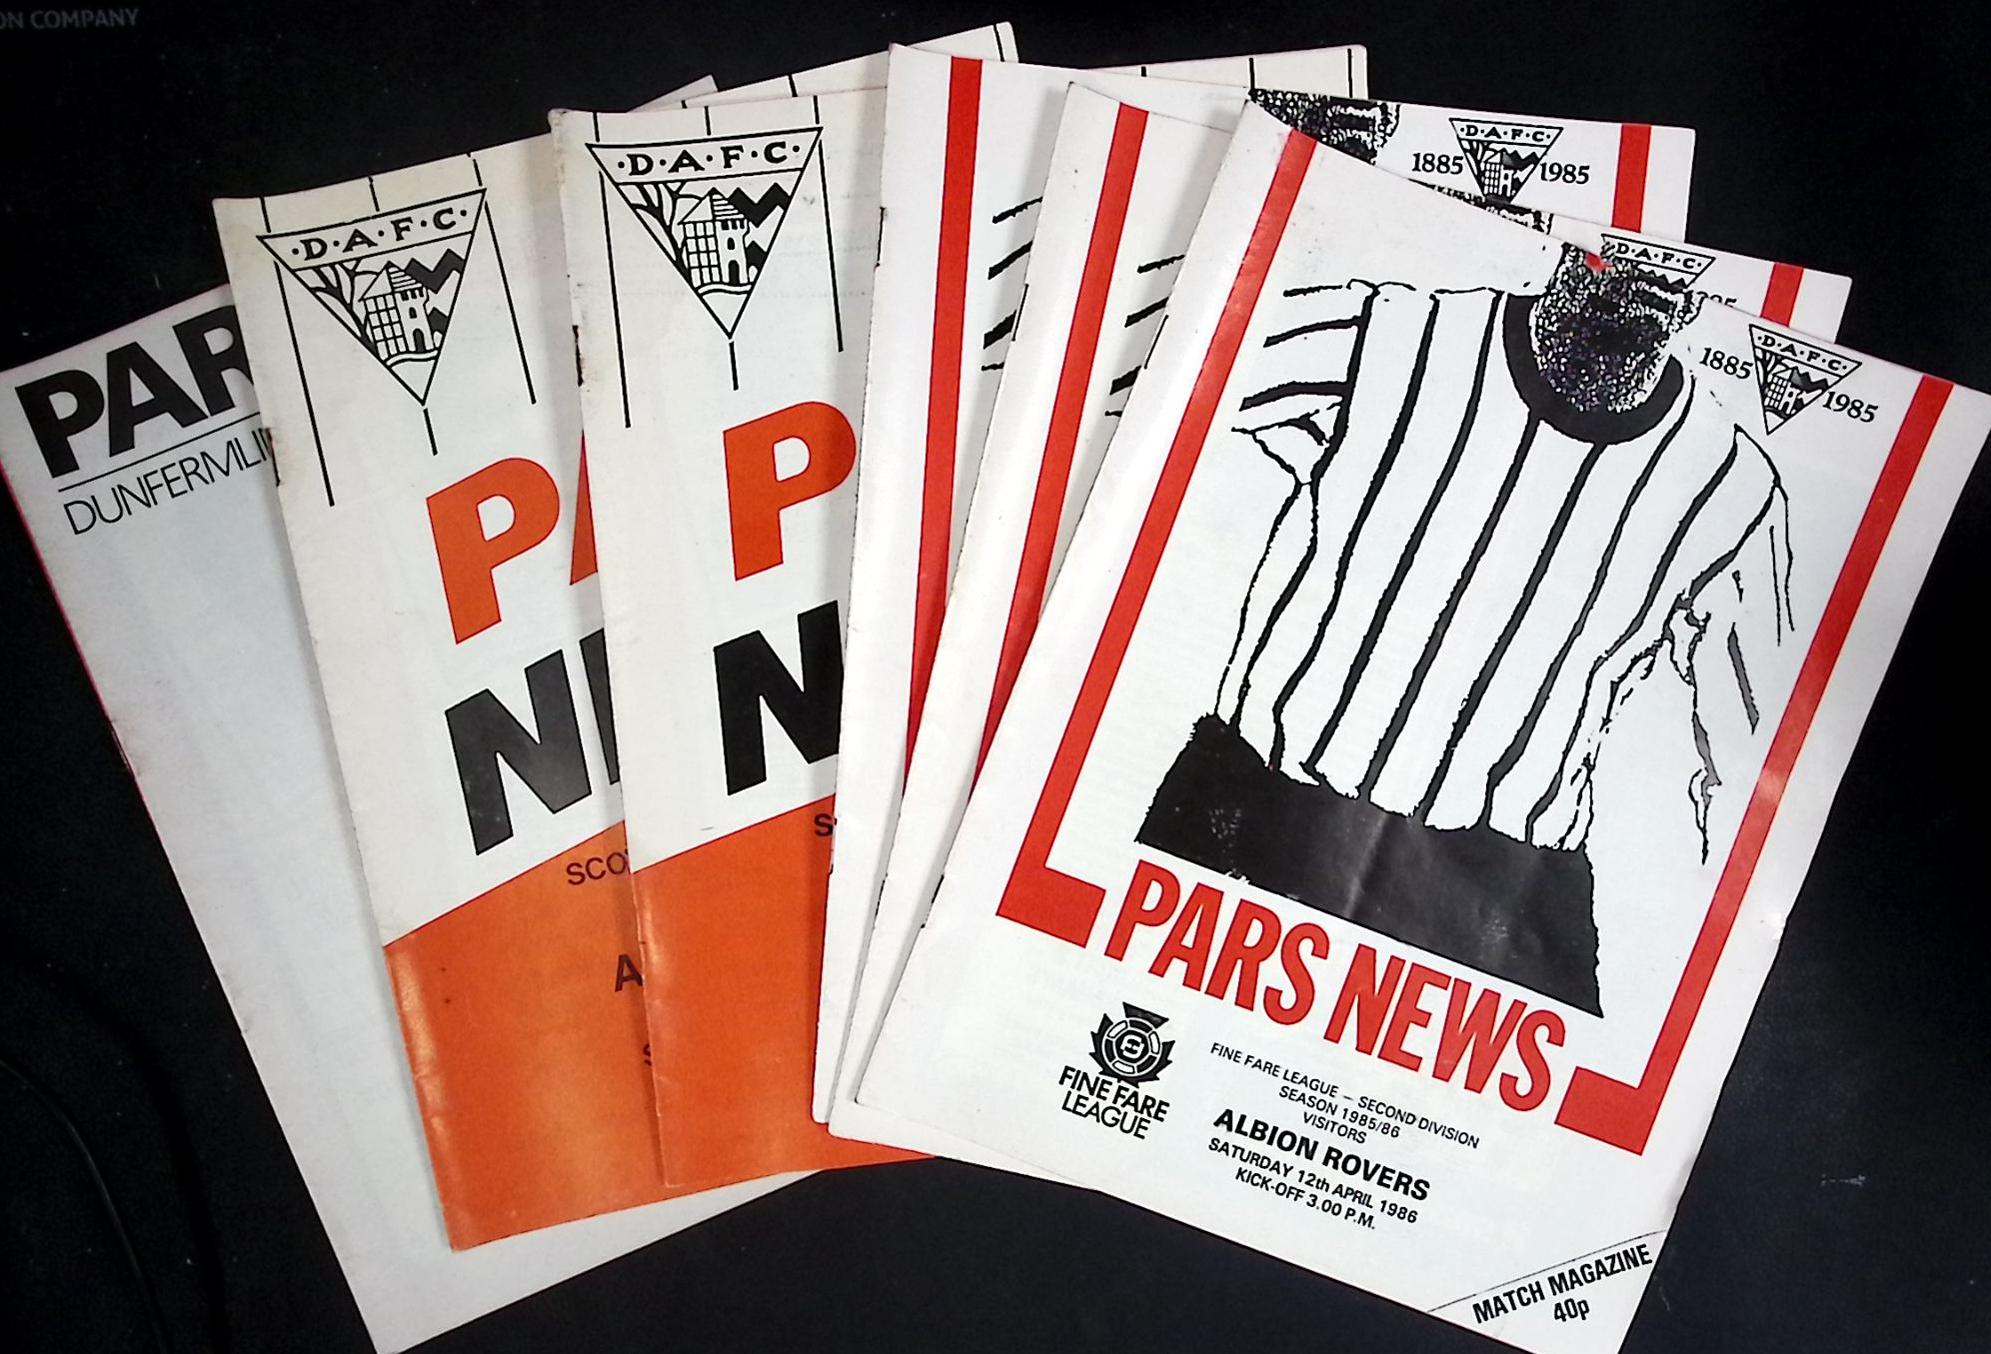 Dunfermline Athletic Football Programmes. Pars News. 1984-86. 6 issues.